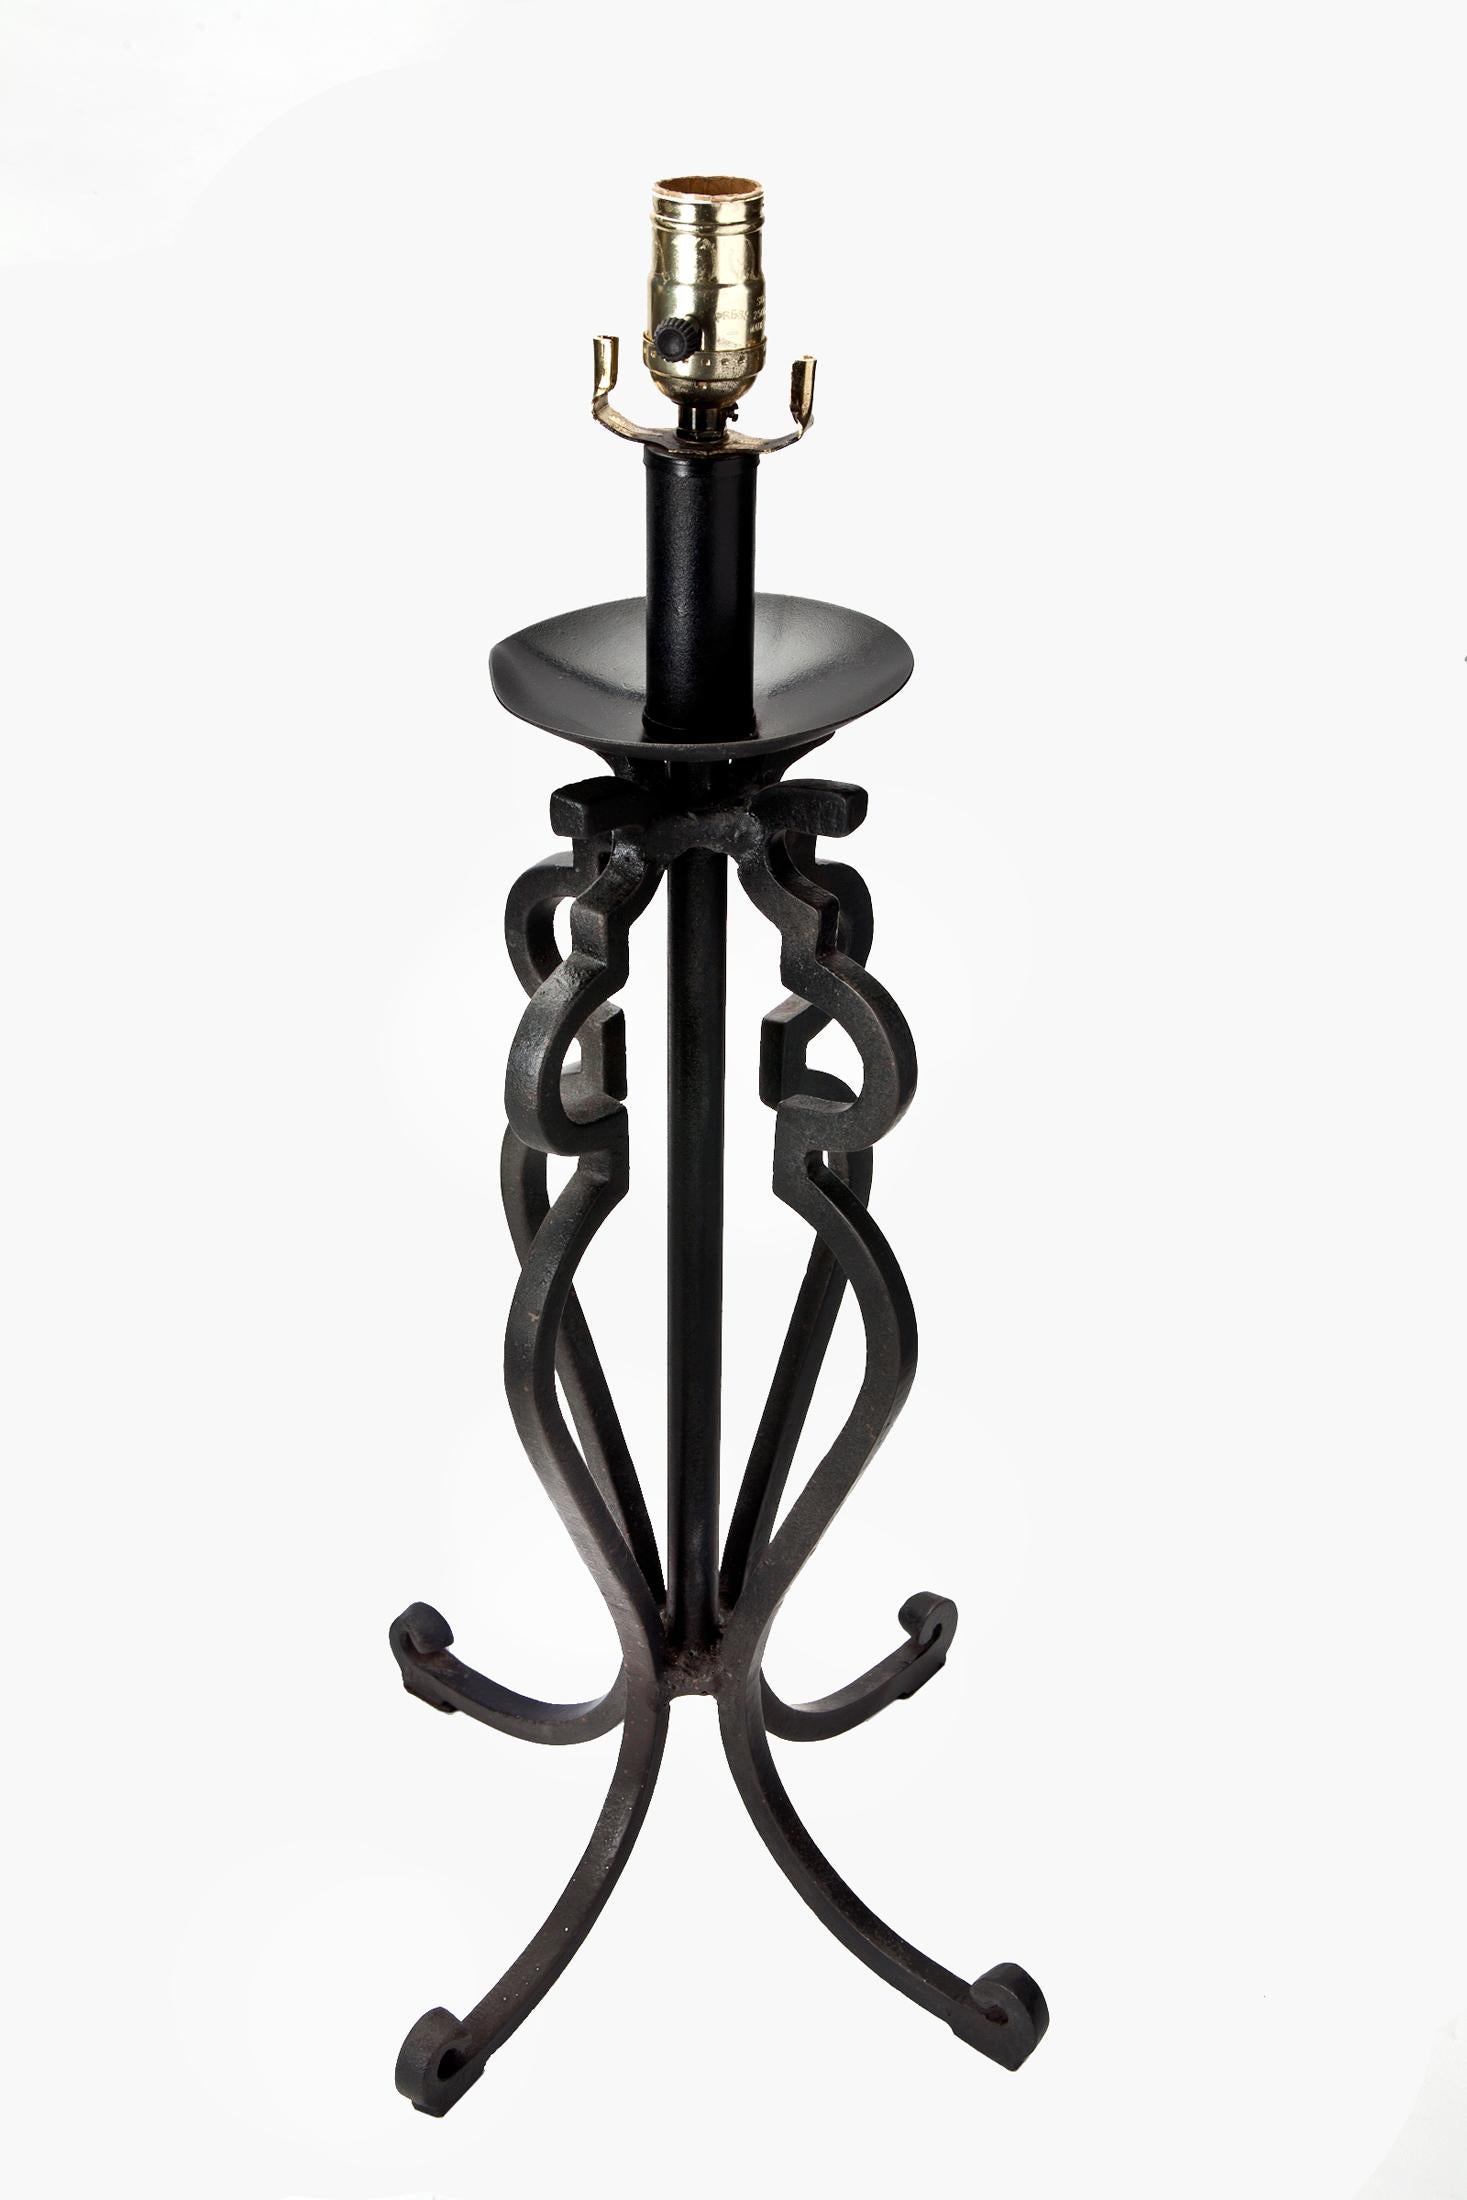 Rustic Wrought Iron Table Lamps, a pair For Sale